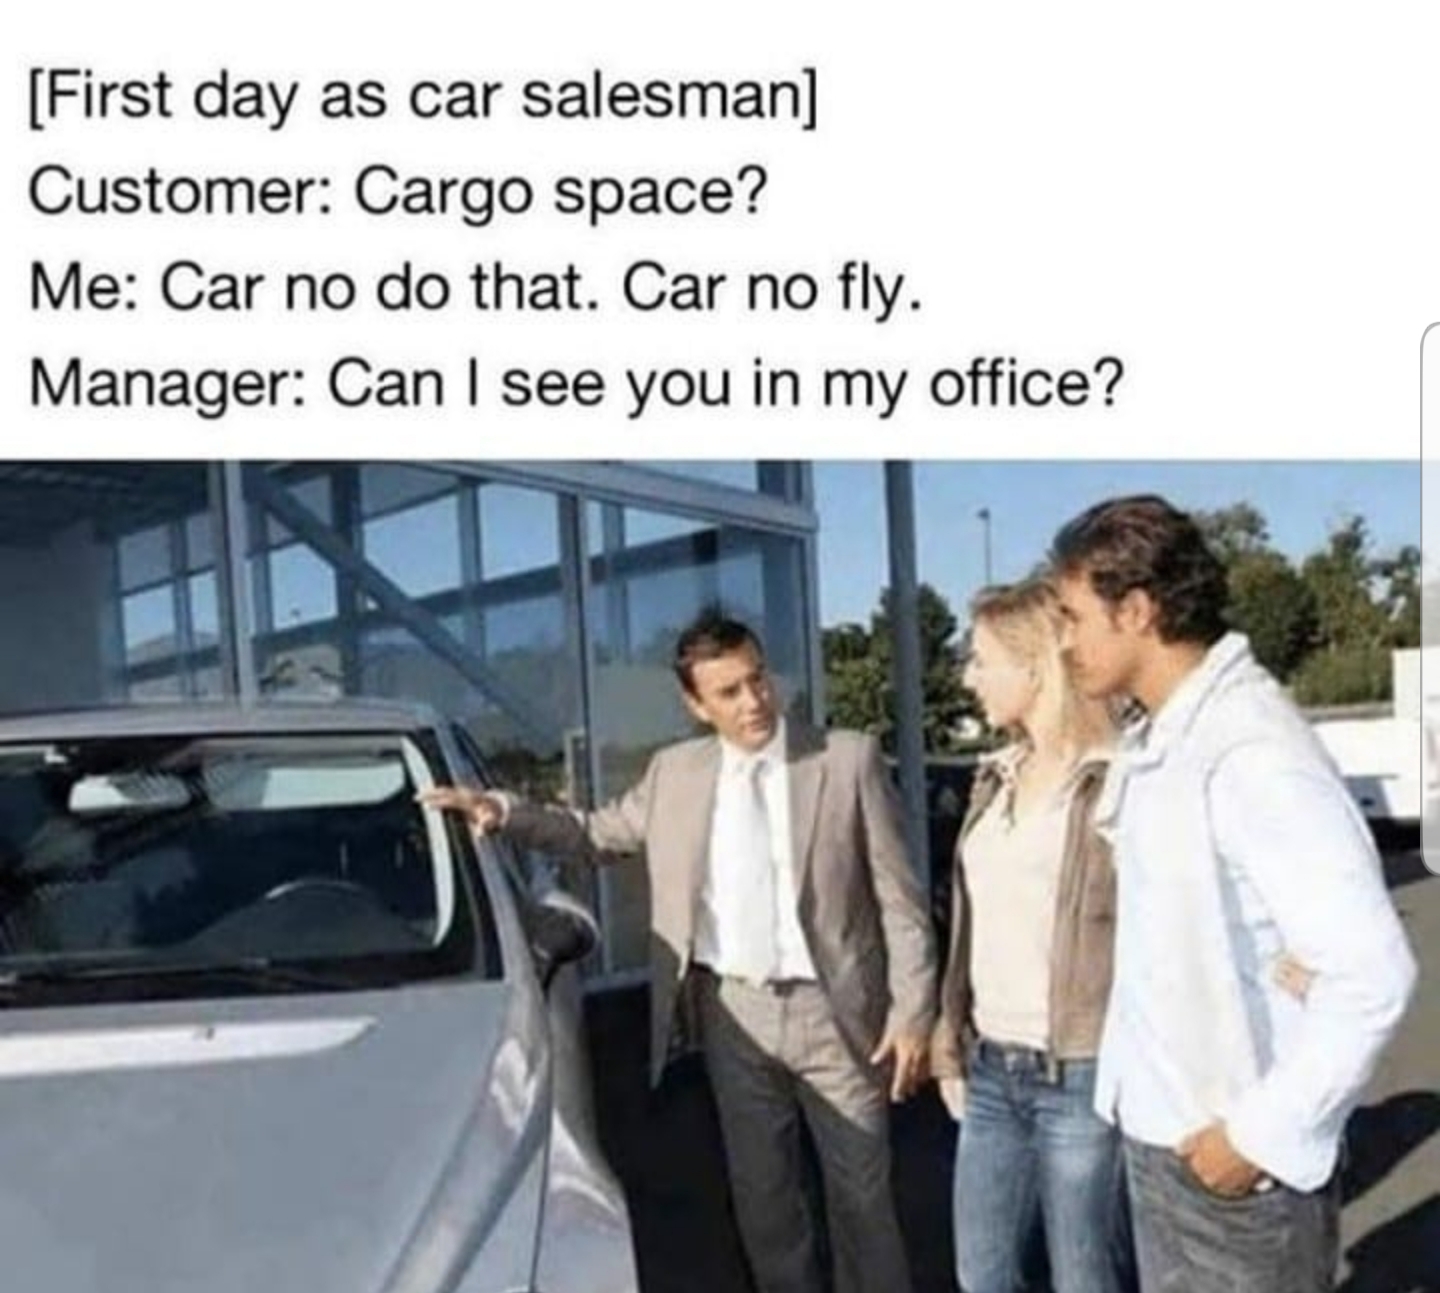 car no do that car no fly - First day as car salesman Customer Cargo space? Me Car no do that. Car no fly. Manager Can I see you in my office?